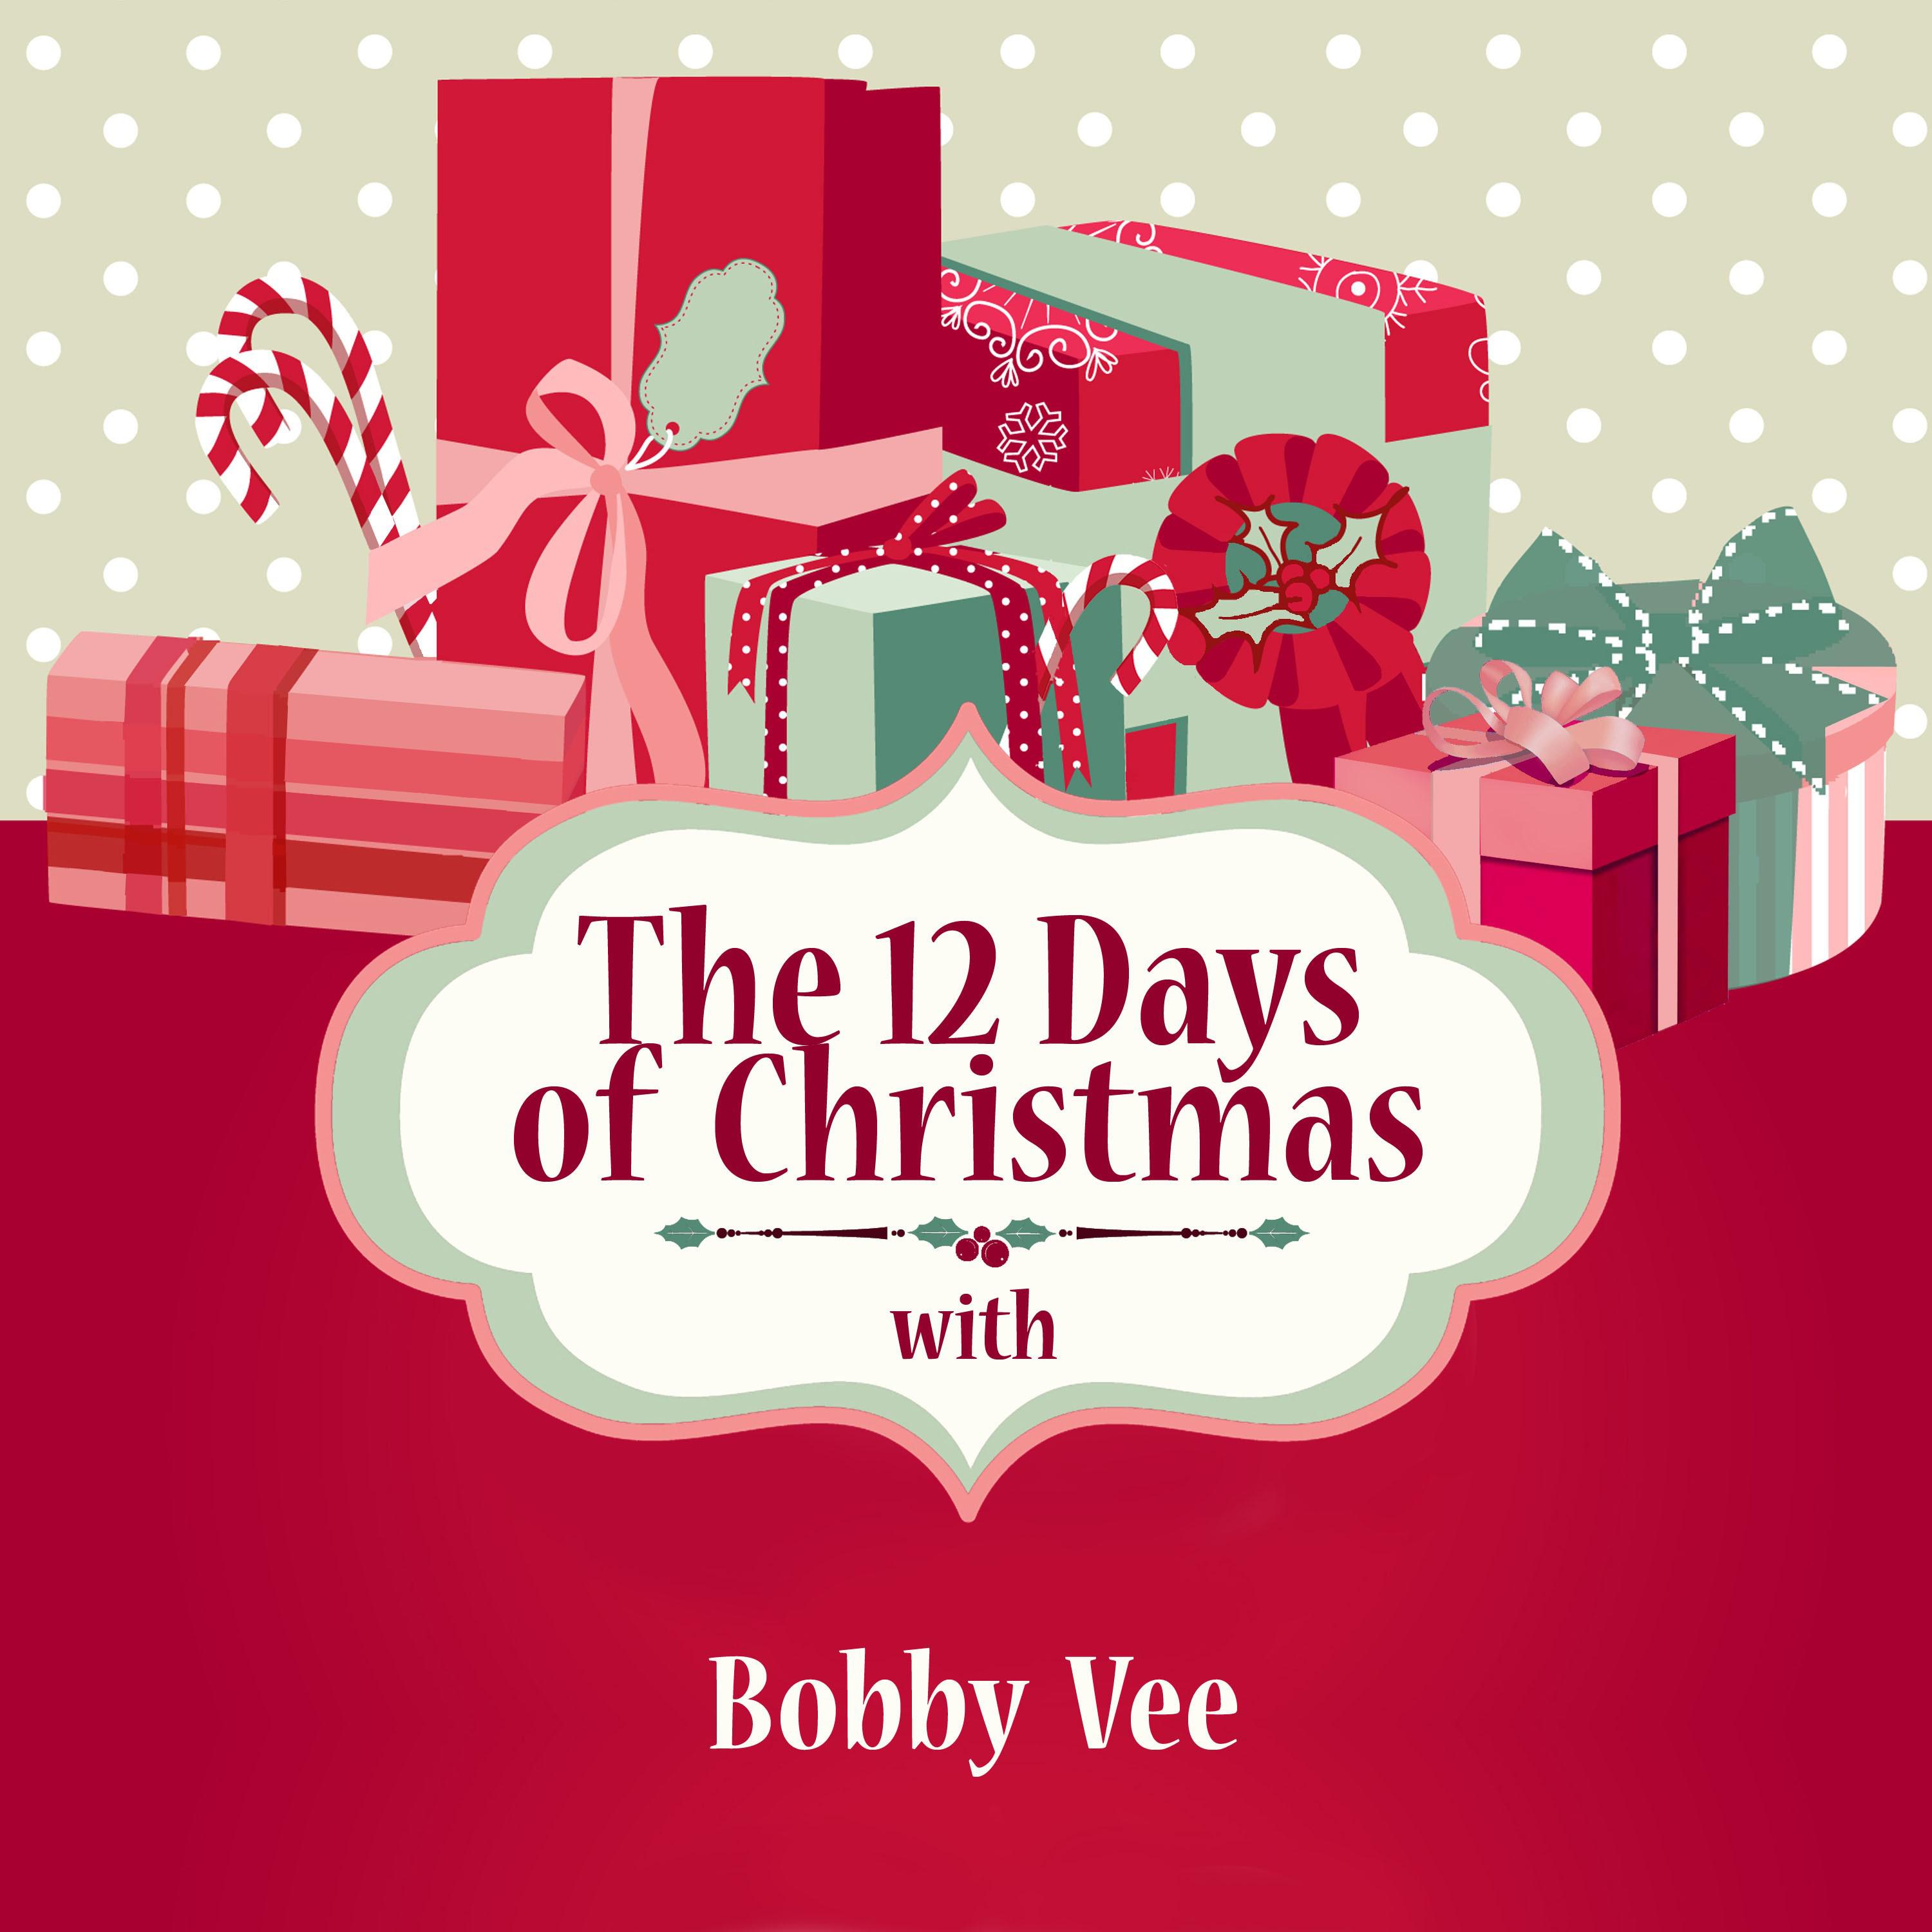 The 12 Days of Christmas with Bobby Vee